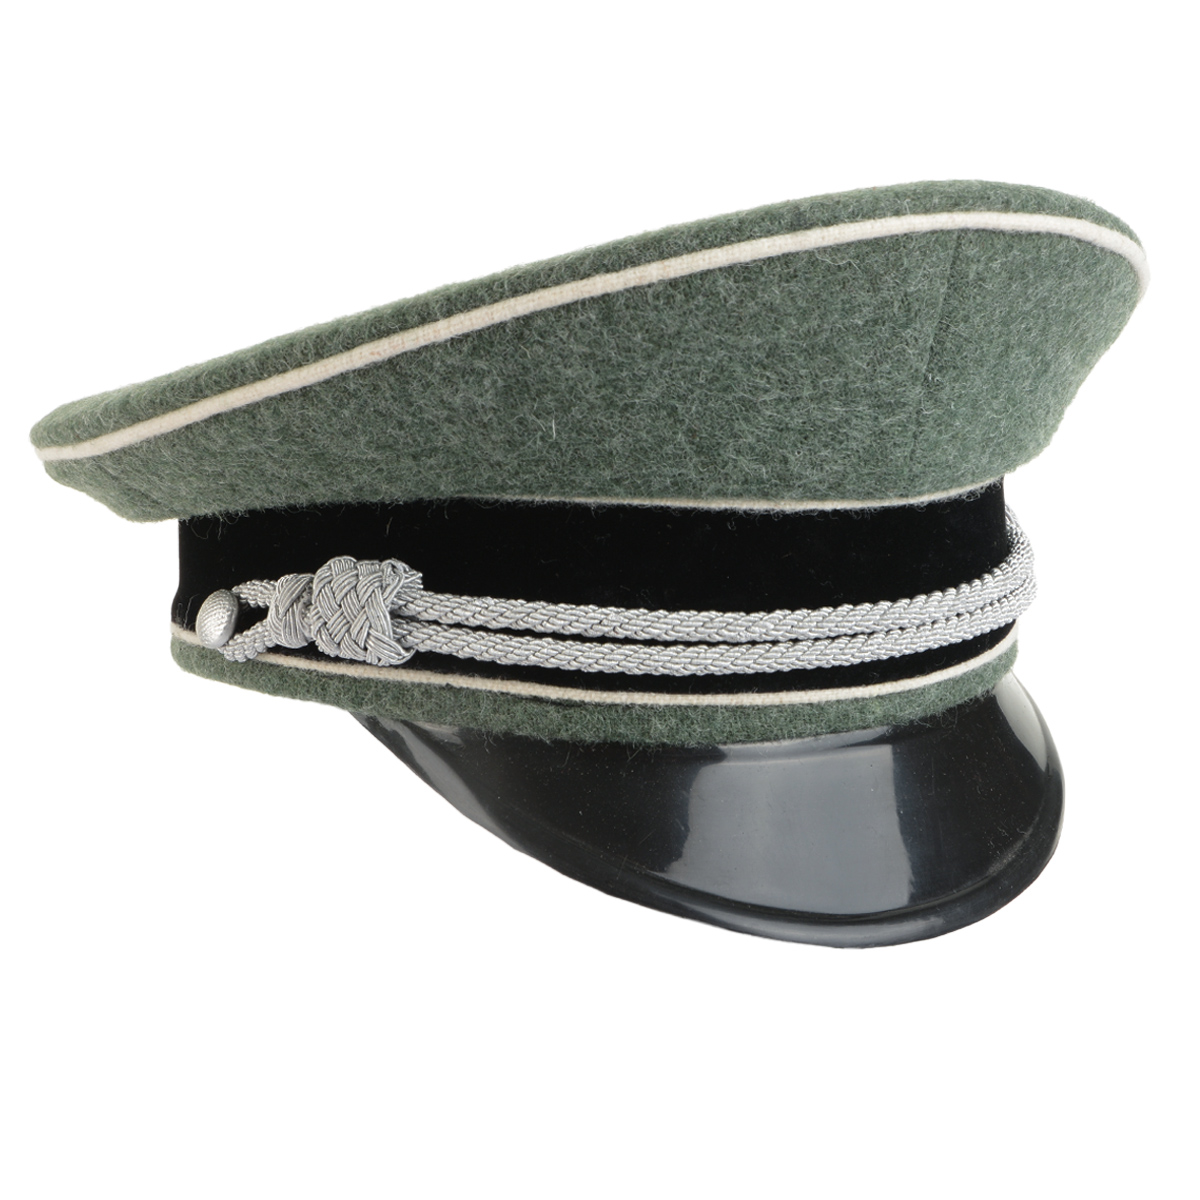 Military WWII WW2 German Elite Officer Hat Officer Cap Black With Eagle Badge M 